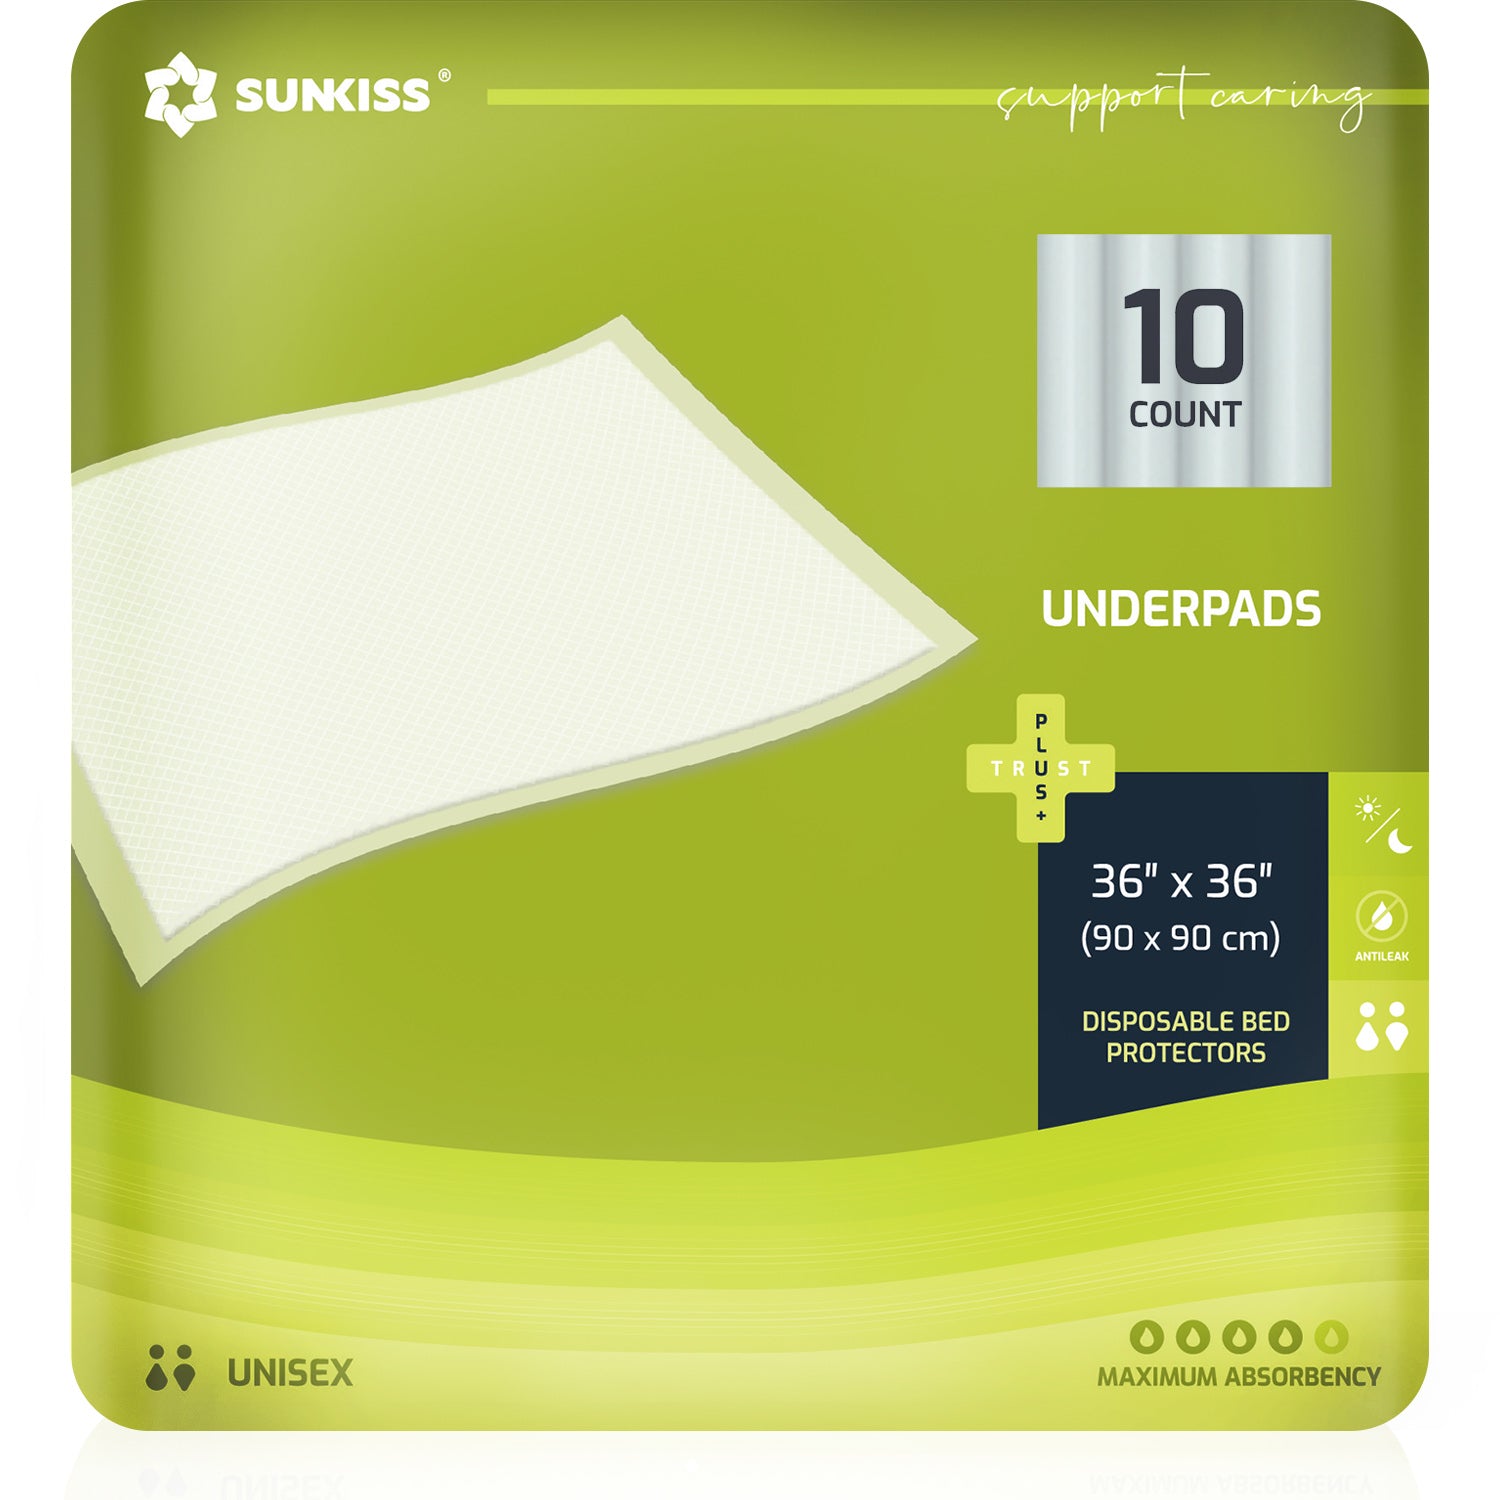  SUNKISS TrustPlus Unisex Incontinence Disposable Underwear,  Heavy Absorbency, Barrier Leak Protection, Odor Control, 16 Count,  Small/Medium : Health & Household